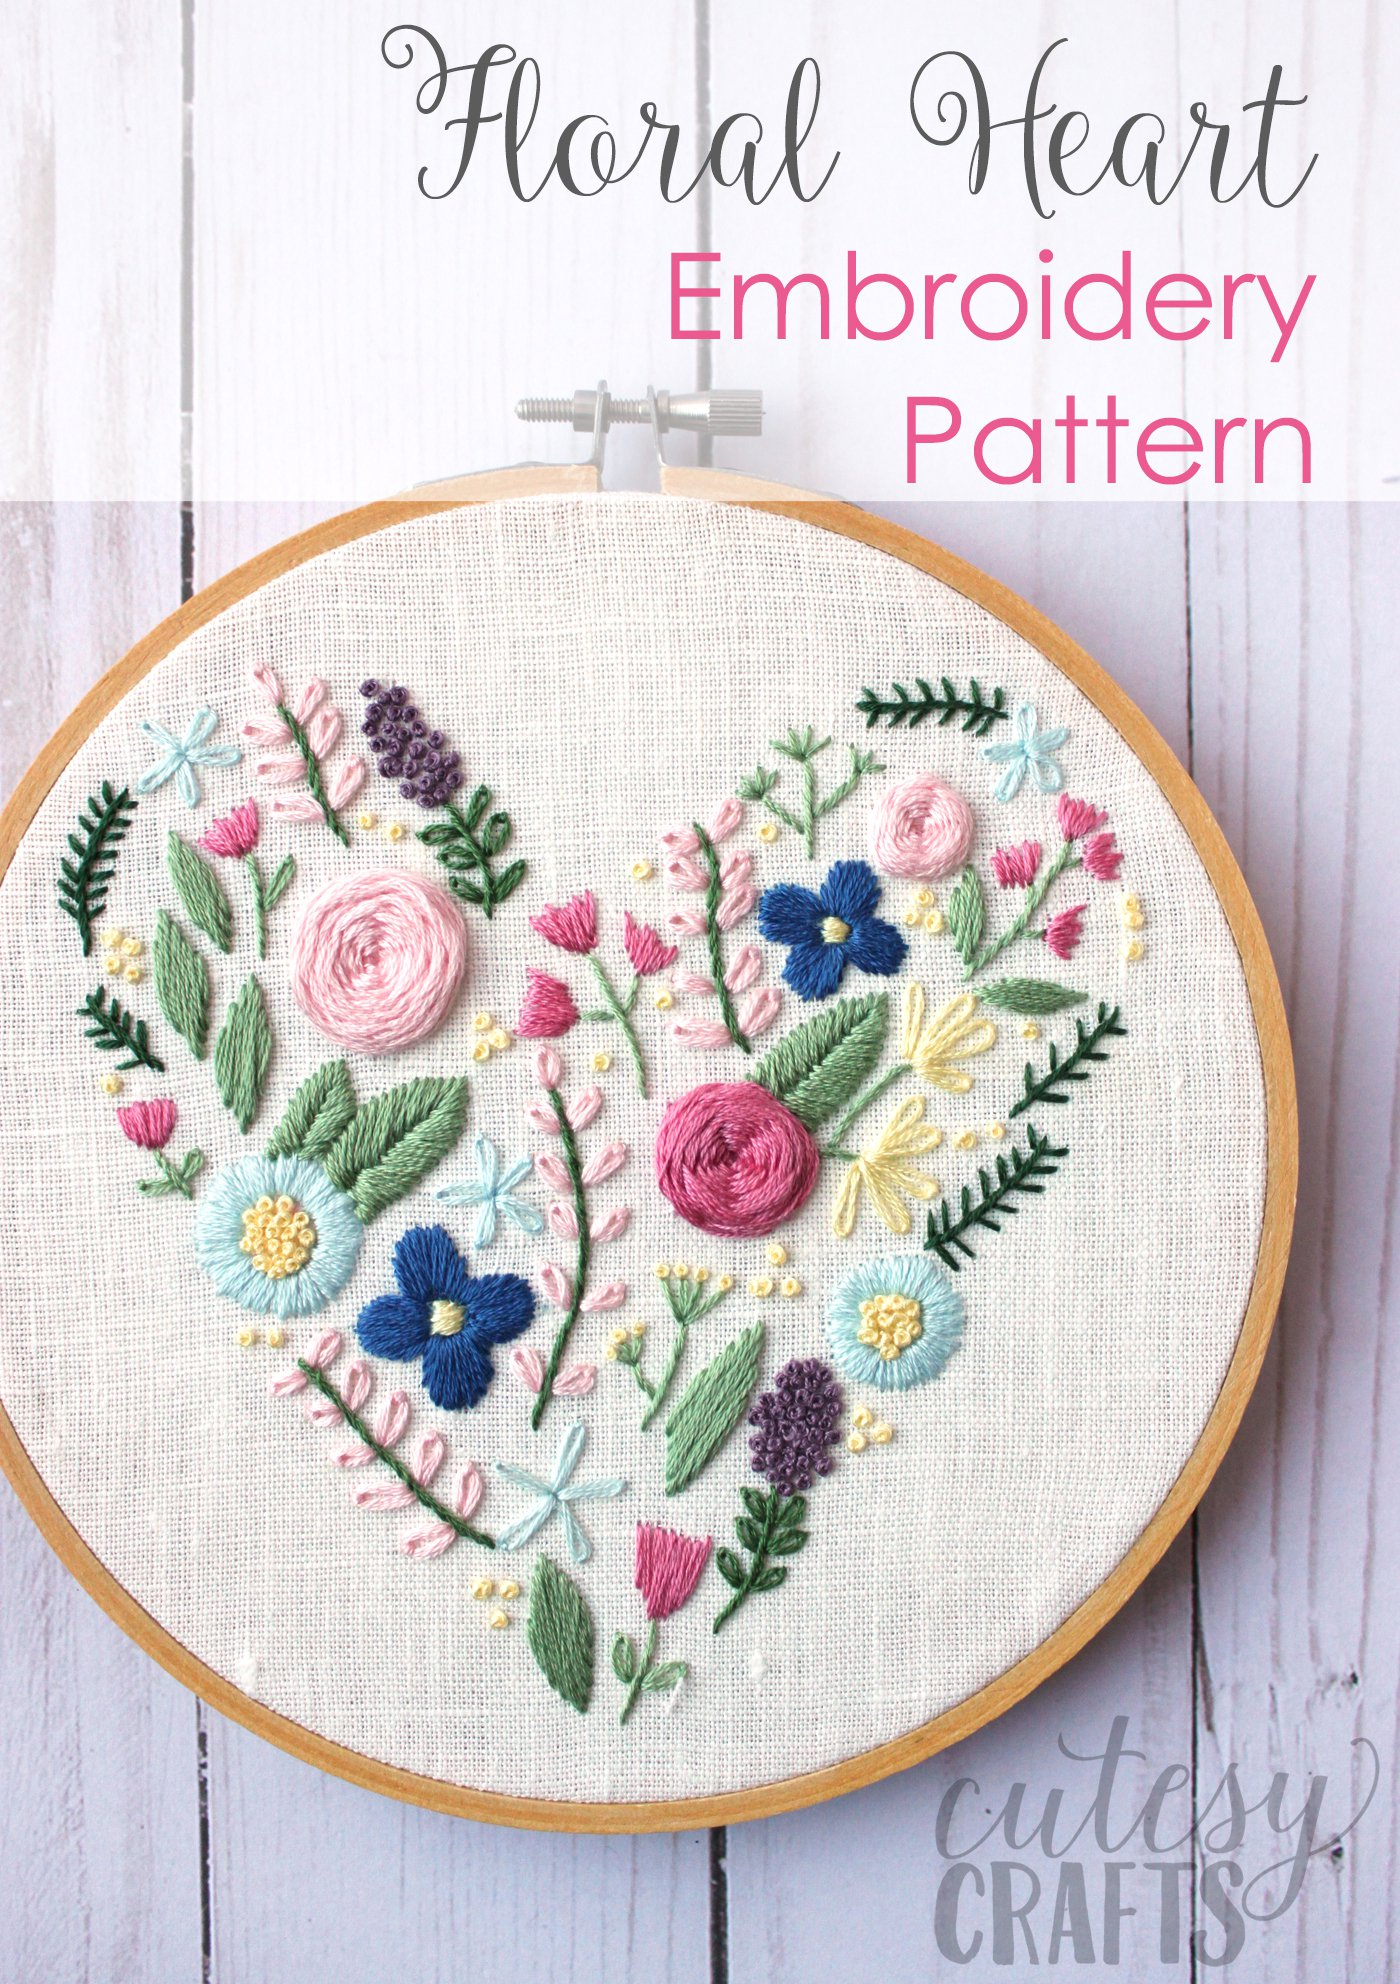 Easter Embroidery Patterns Floral Heart Hand Embroidery Pattern The Polka Dot Chair